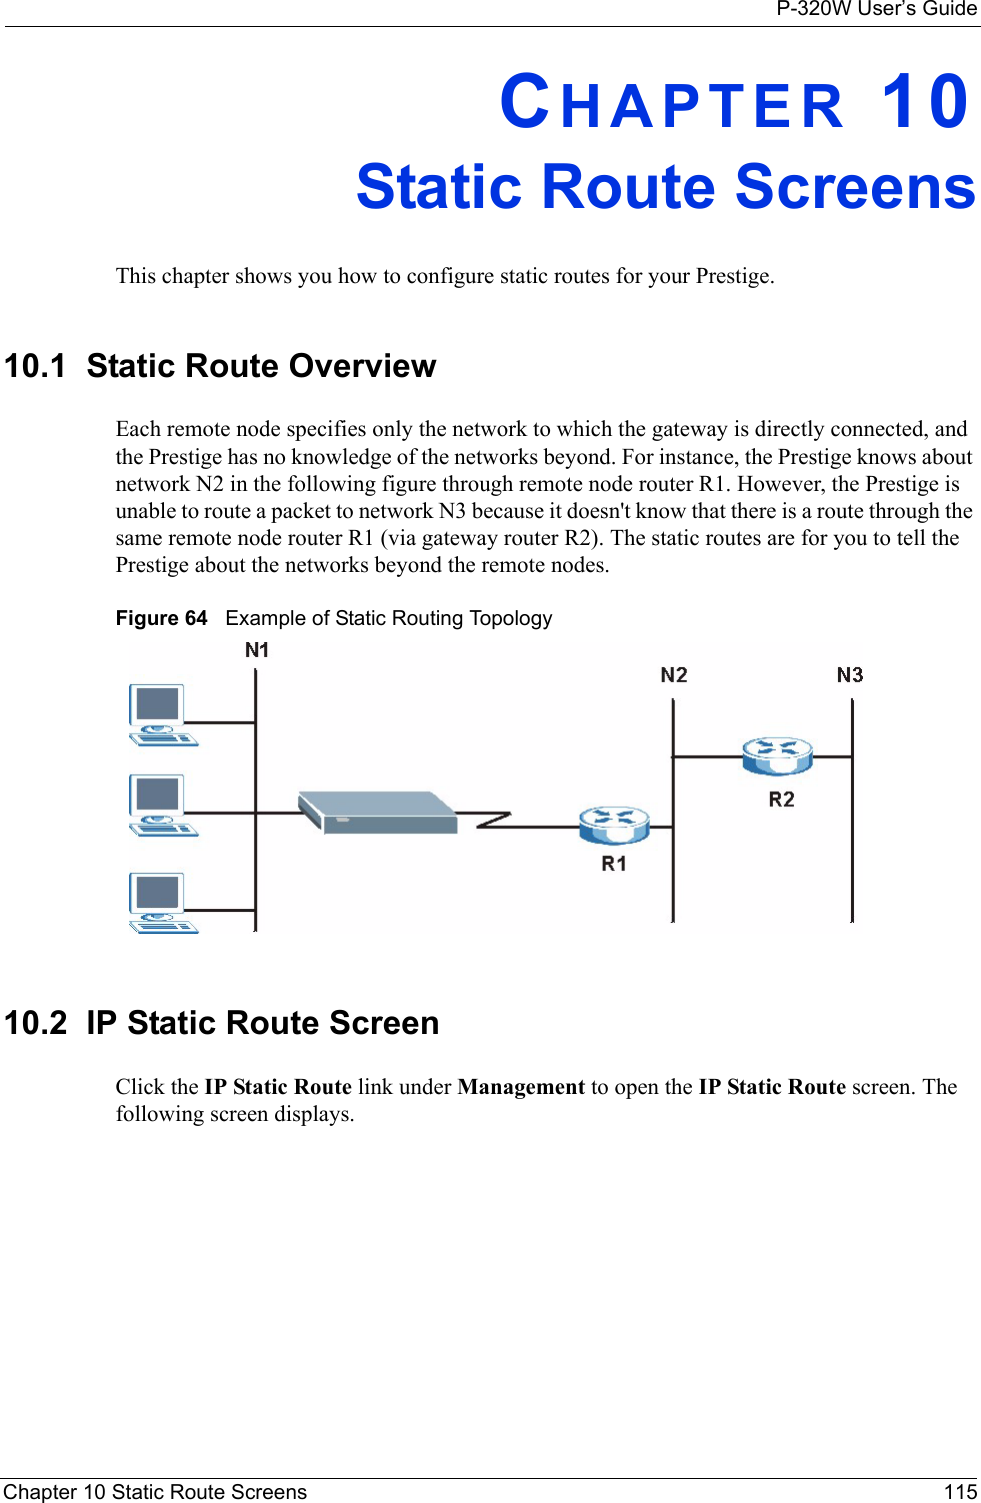 P-320W User’s GuideChapter 10 Static Route Screens 115CHAPTER 10Static Route ScreensThis chapter shows you how to configure static routes for your Prestige.10.1  Static Route OverviewEach remote node specifies only the network to which the gateway is directly connected, and the Prestige has no knowledge of the networks beyond. For instance, the Prestige knows about network N2 in the following figure through remote node router R1. However, the Prestige is unable to route a packet to network N3 because it doesn&apos;t know that there is a route through the same remote node router R1 (via gateway router R2). The static routes are for you to tell the Prestige about the networks beyond the remote nodes.Figure 64   Example of Static Routing Topology10.2  IP Static Route ScreenClick the IP Static Route link under Management to open the IP Static Route screen. The following screen displays.